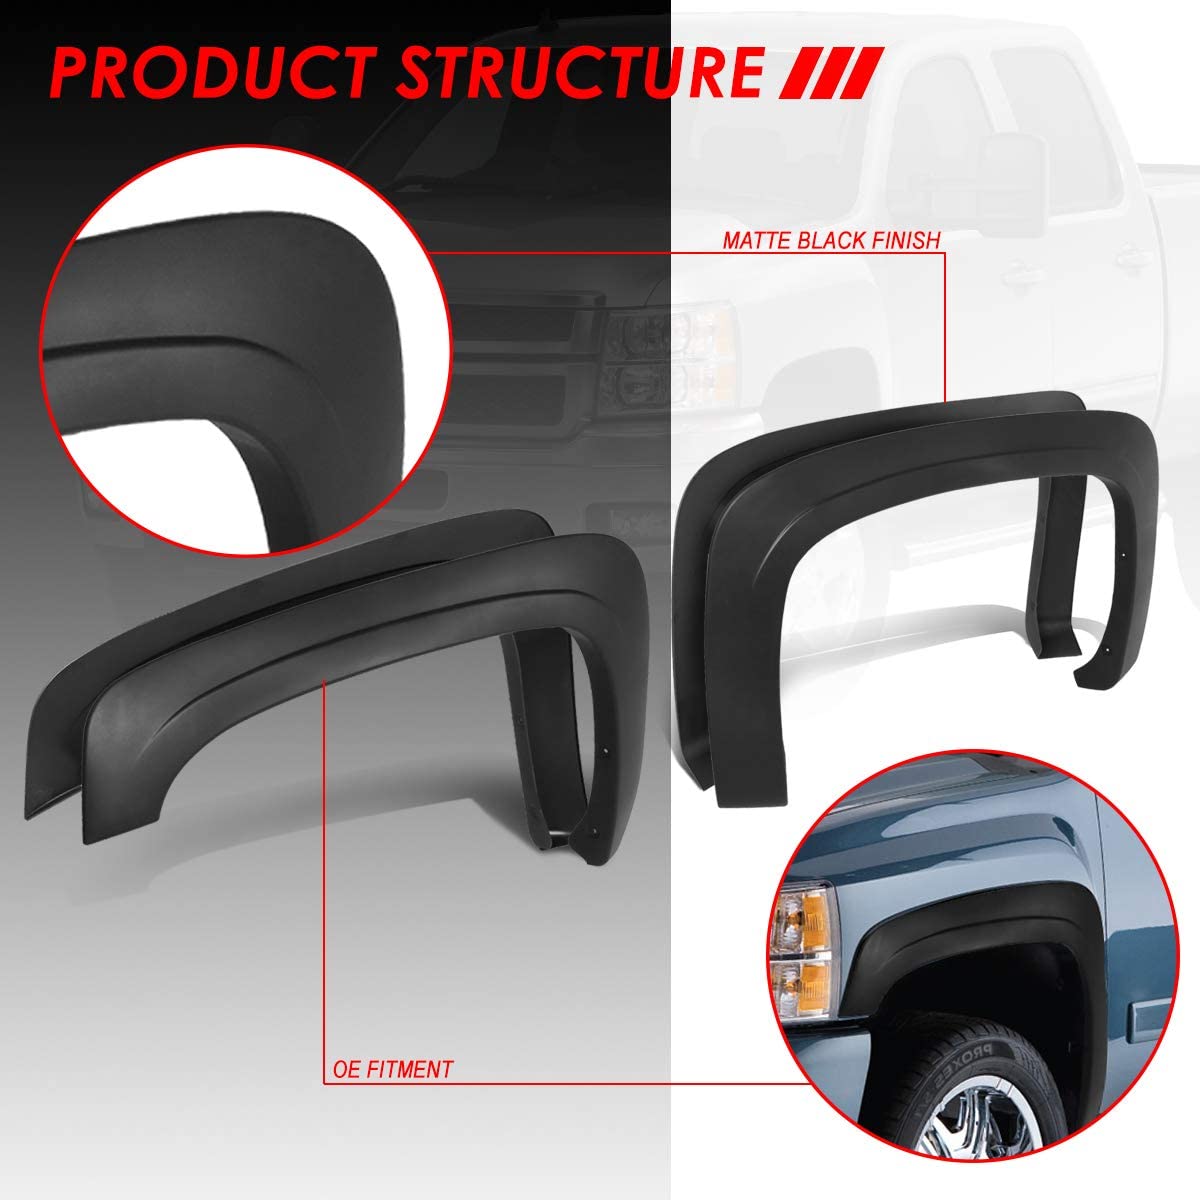 Buy OE Style 4Pcs Wheel Fender Flares Replacement for Silverado 1500 2500  3500HD 6.5 8.1 ft Bed Standard Extended Cab 07-14 Online in Indonesia.  B07CZ5VJH9